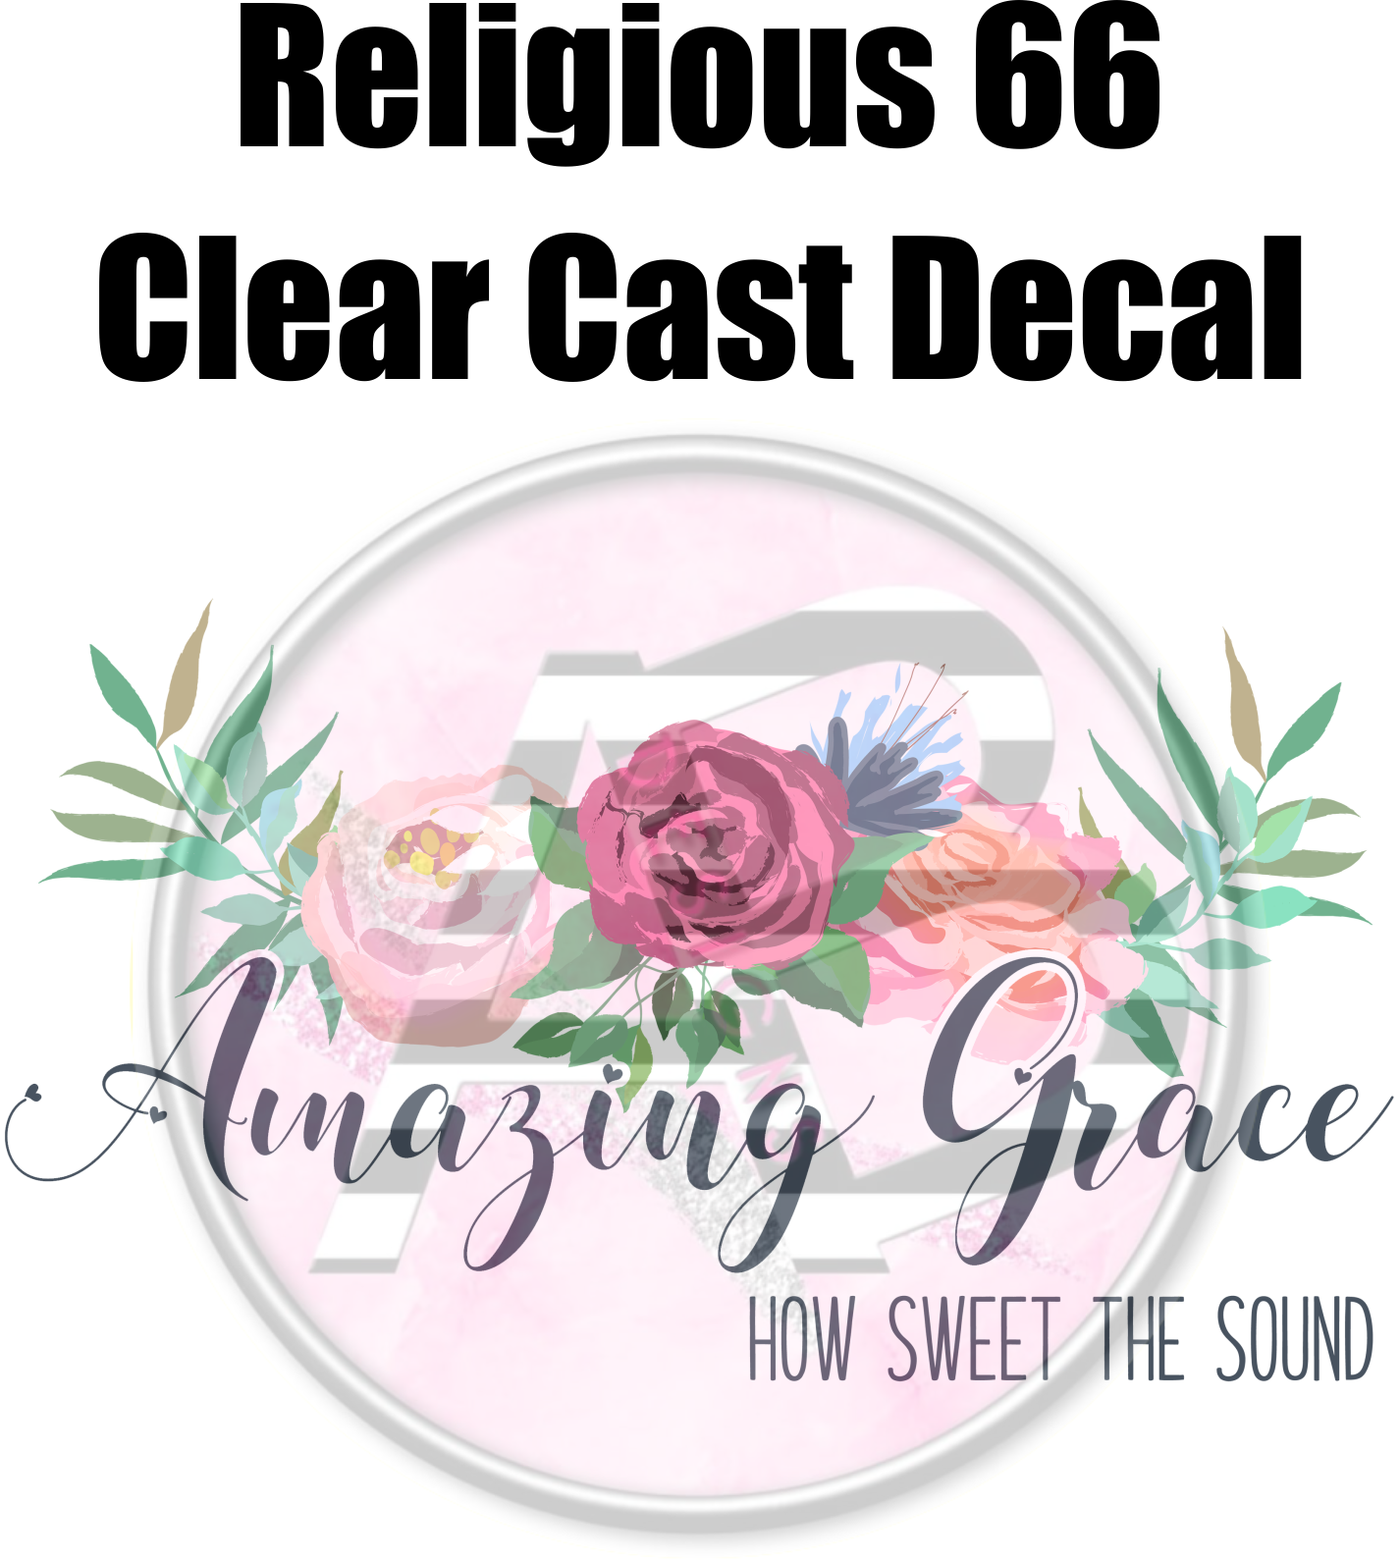 Religious 66 - Clear Cast Decal - 74